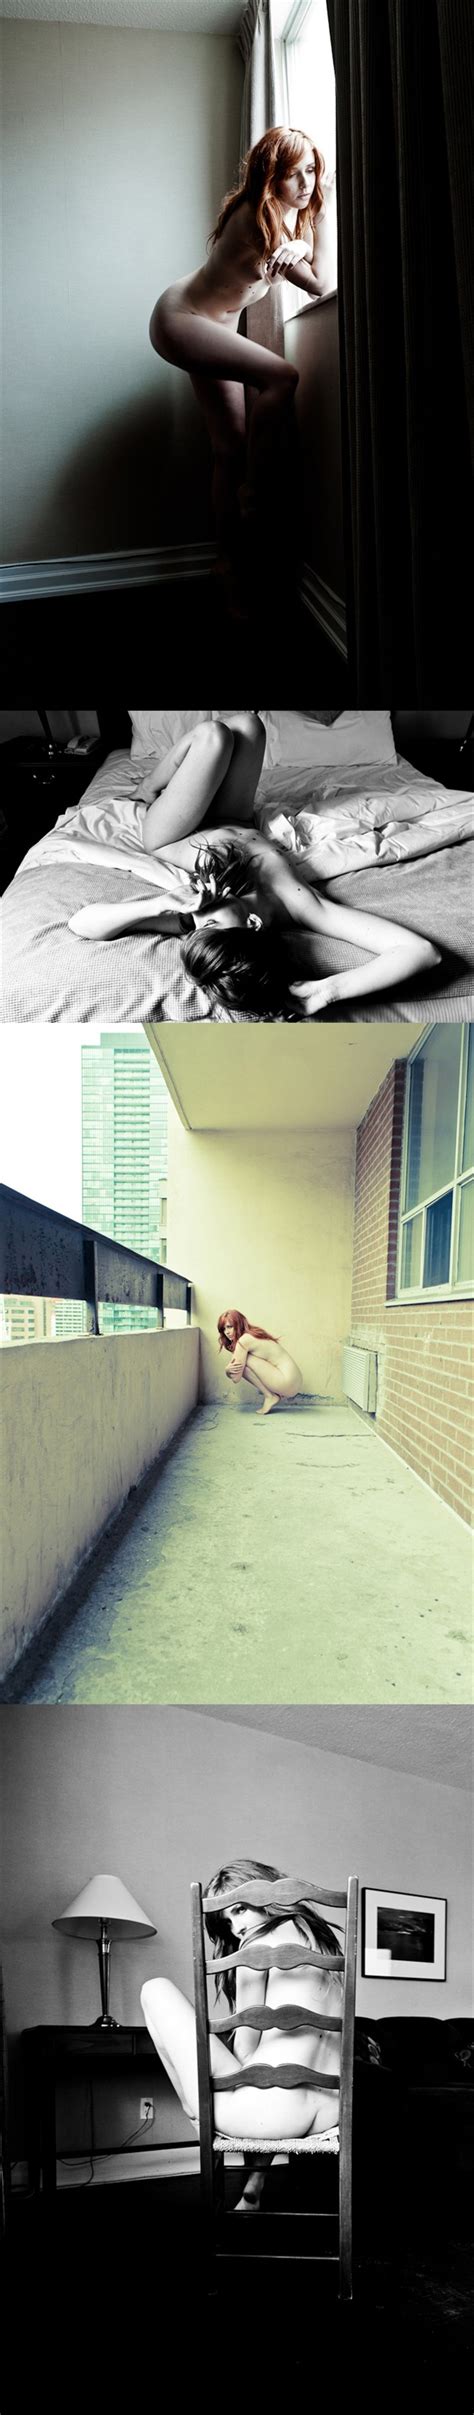 Artistic Nude Architectural Photo By Model Dane Halo At Model Society